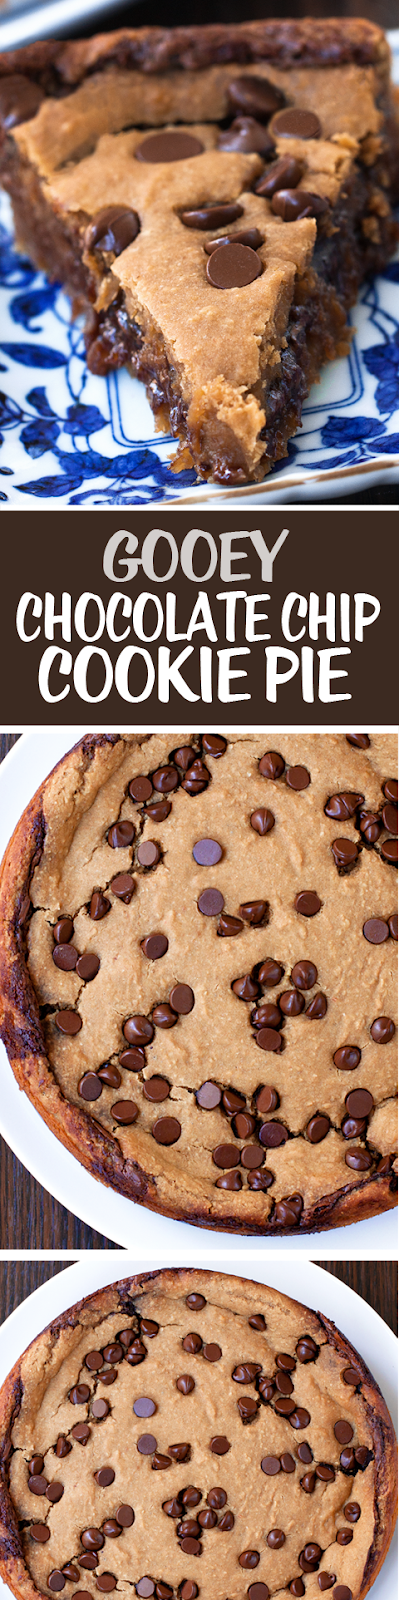 Makeout Chocolate Chip Cookie Pie Recipes